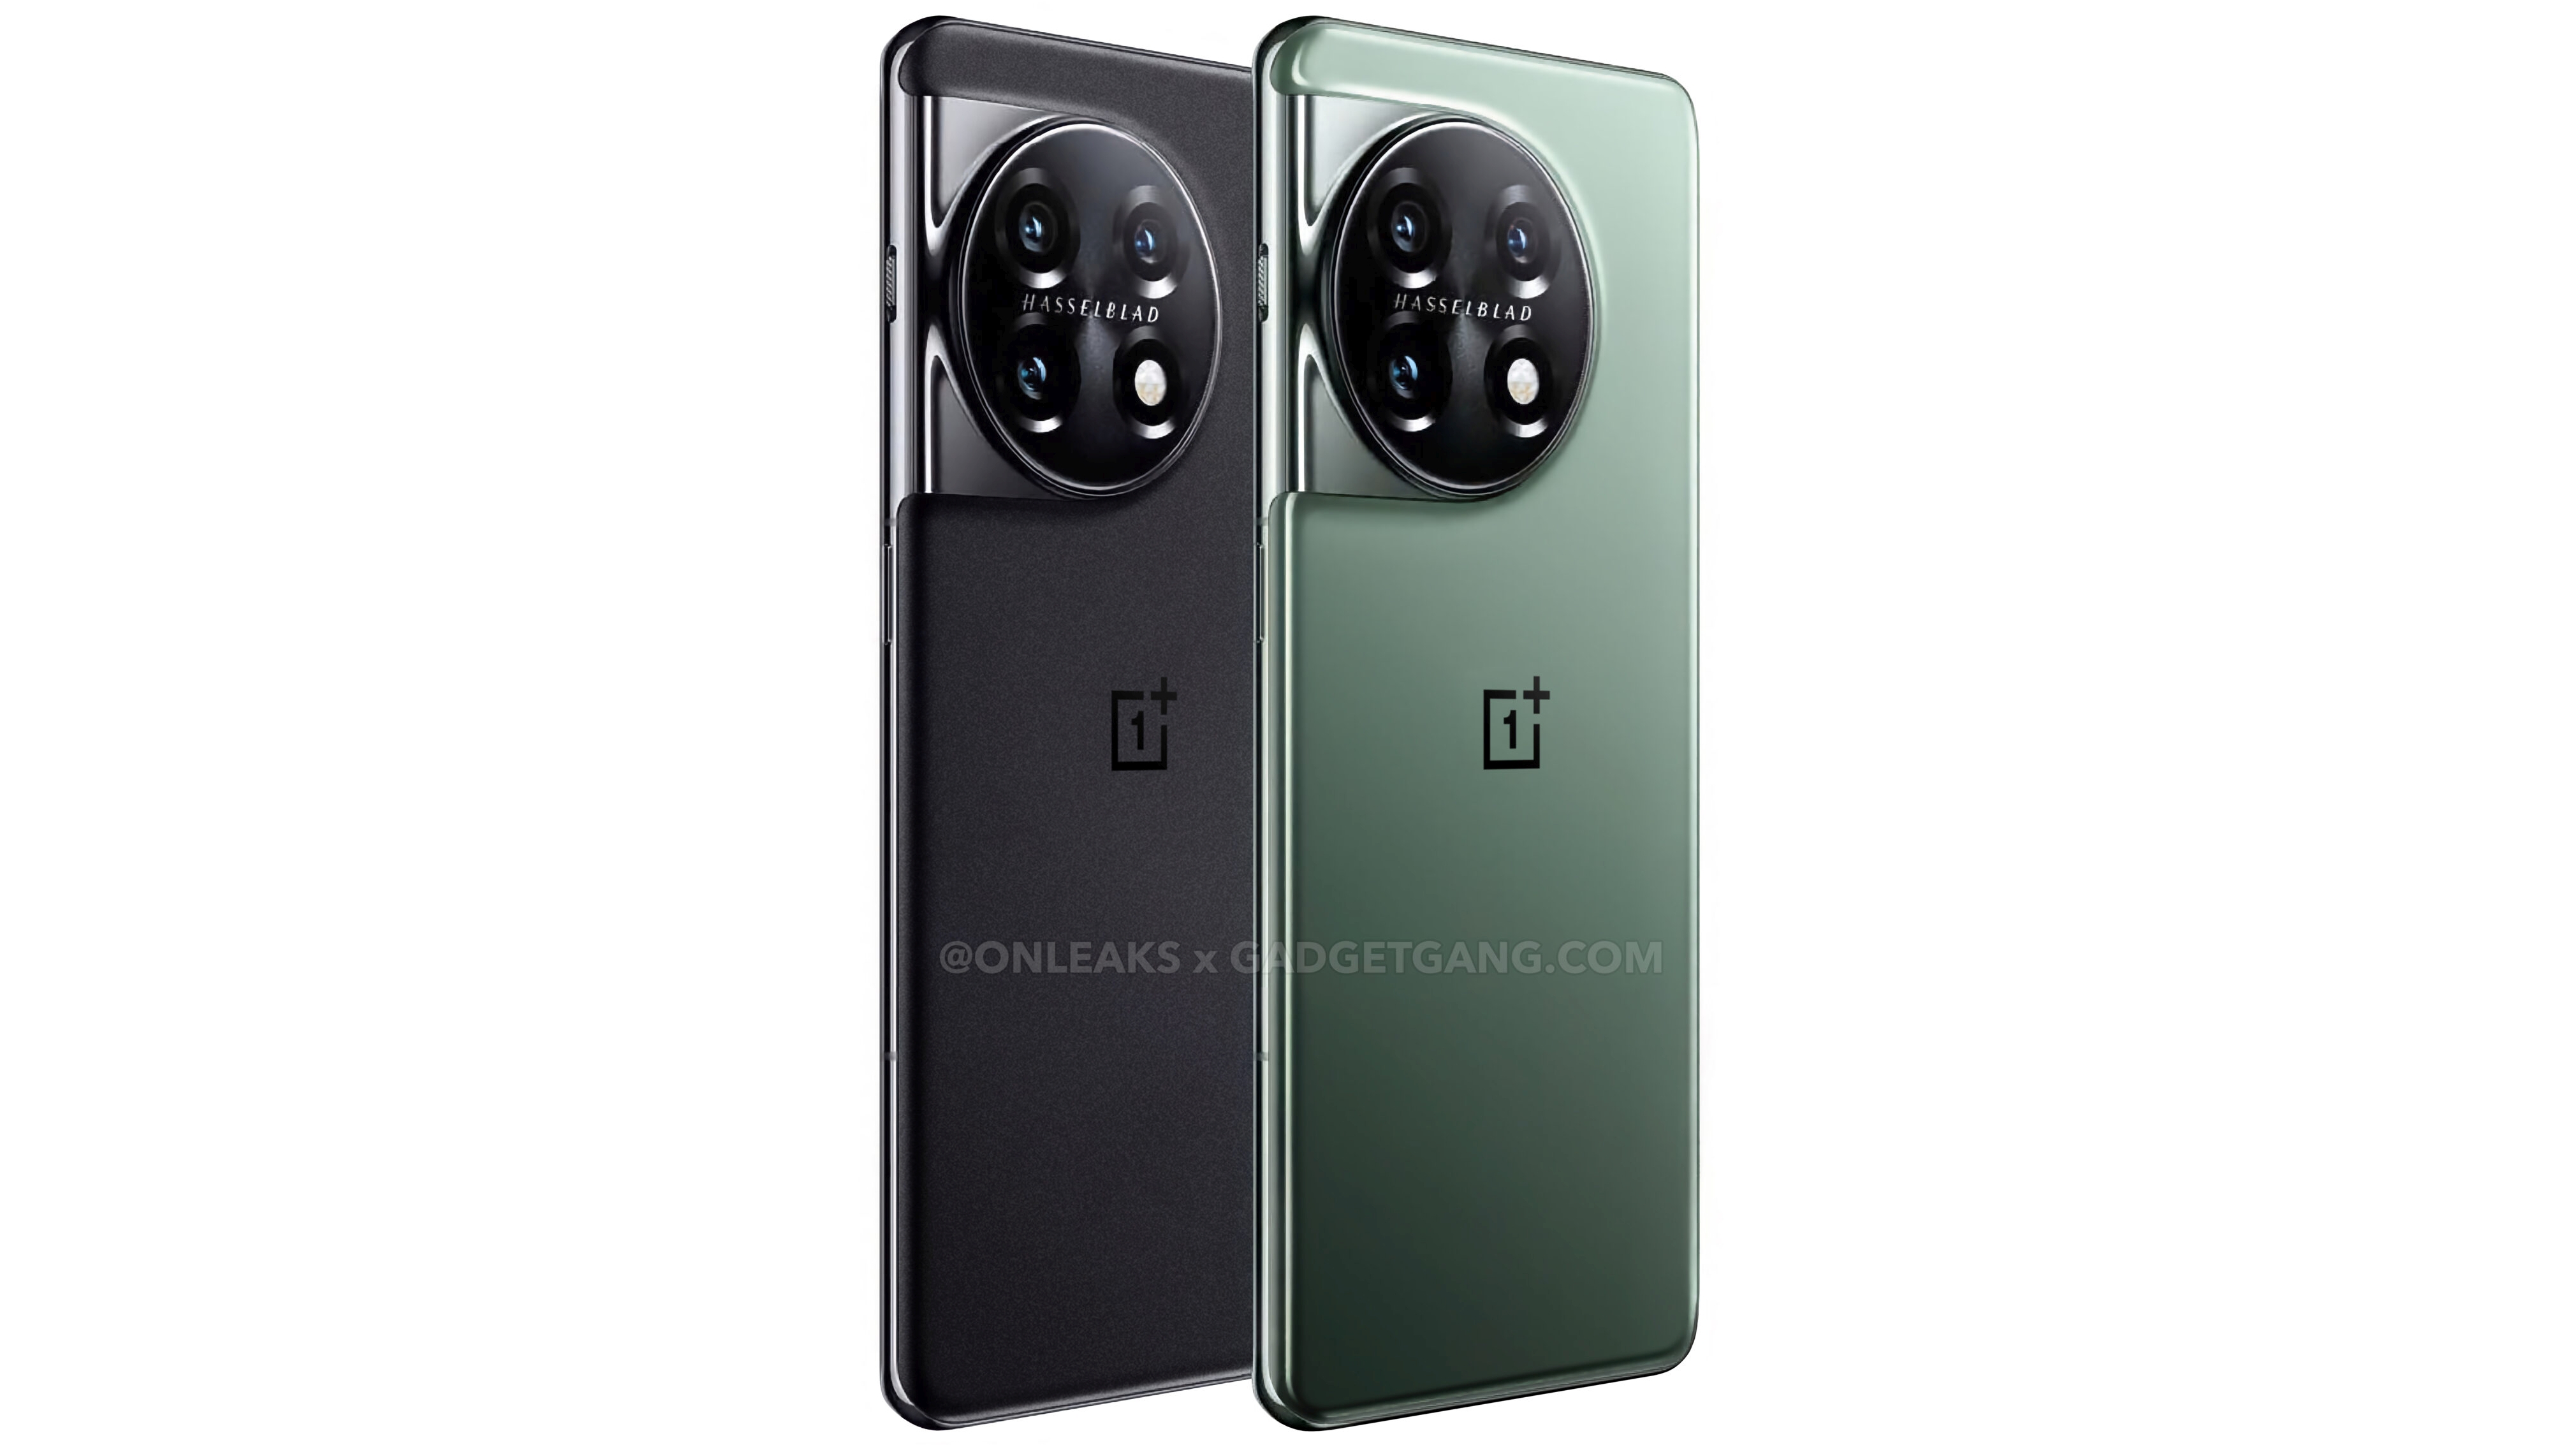 A leaked render of the OnePlus 11 in black and green shades